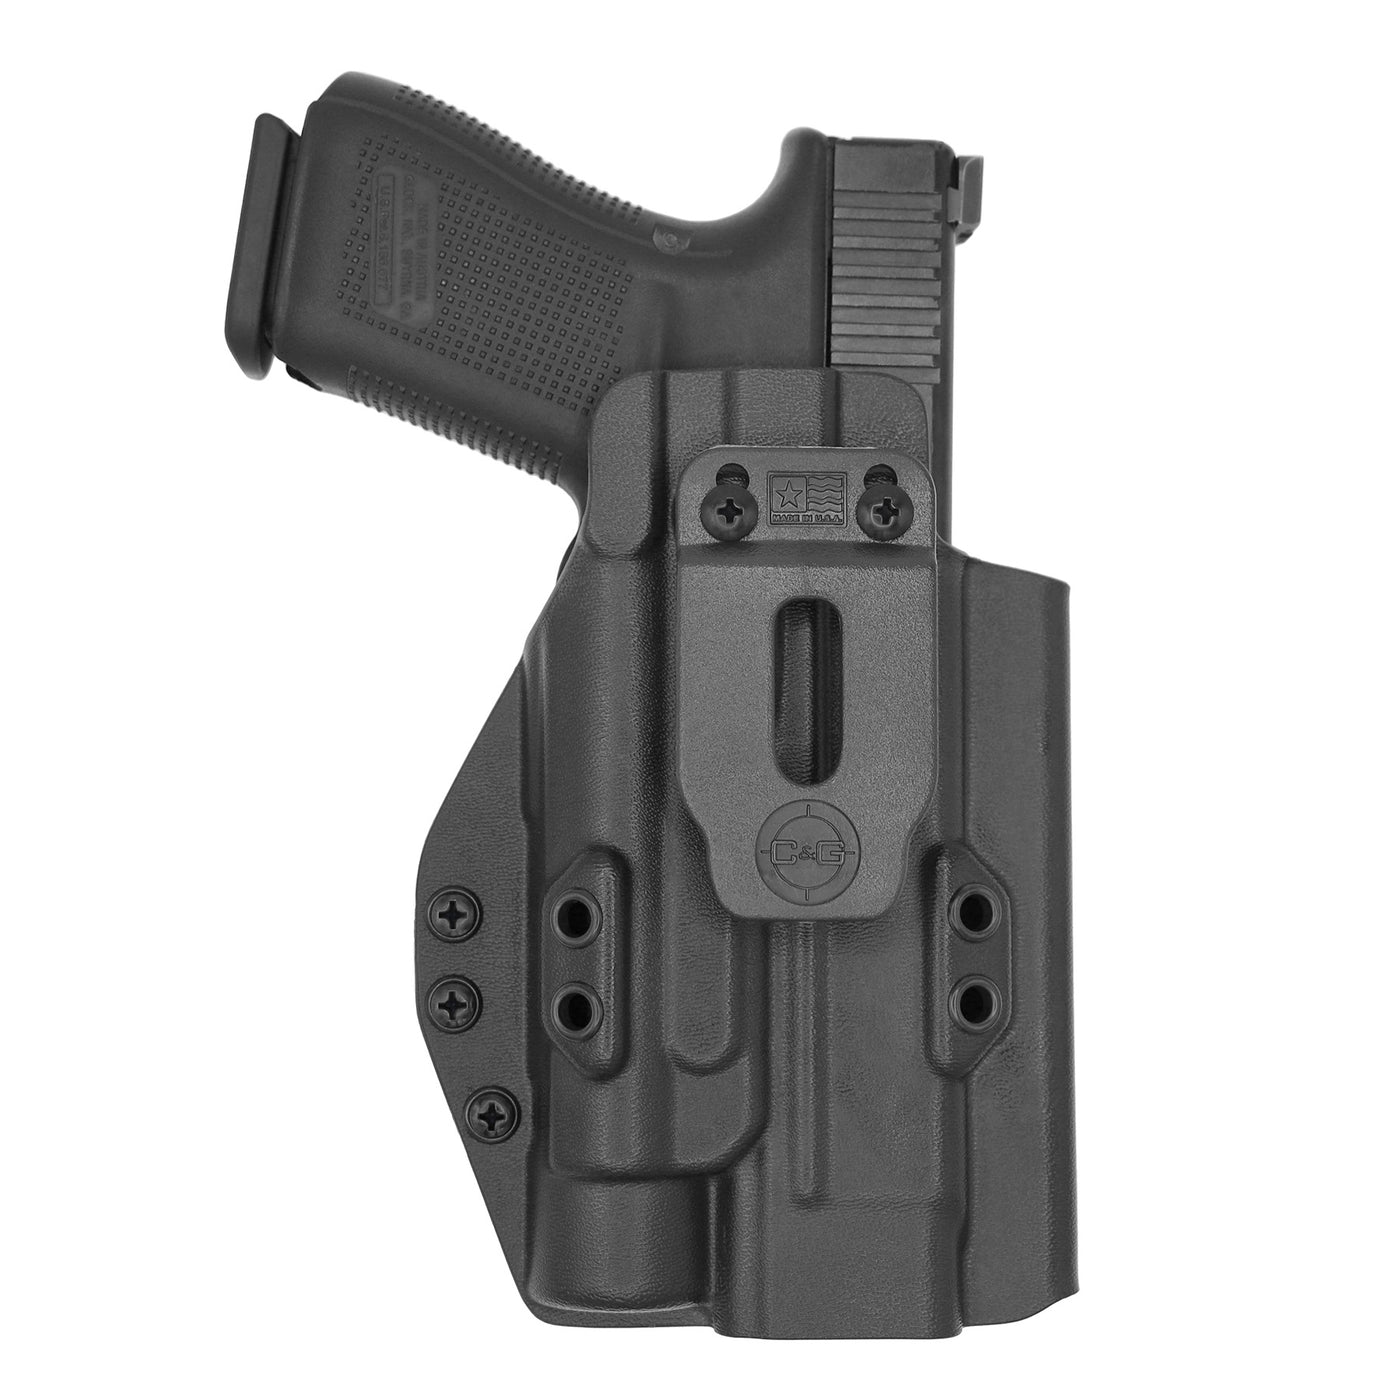 C&G Holsters Custom IWB Tactical Poly80 Streamlight TLR1 in holstered position